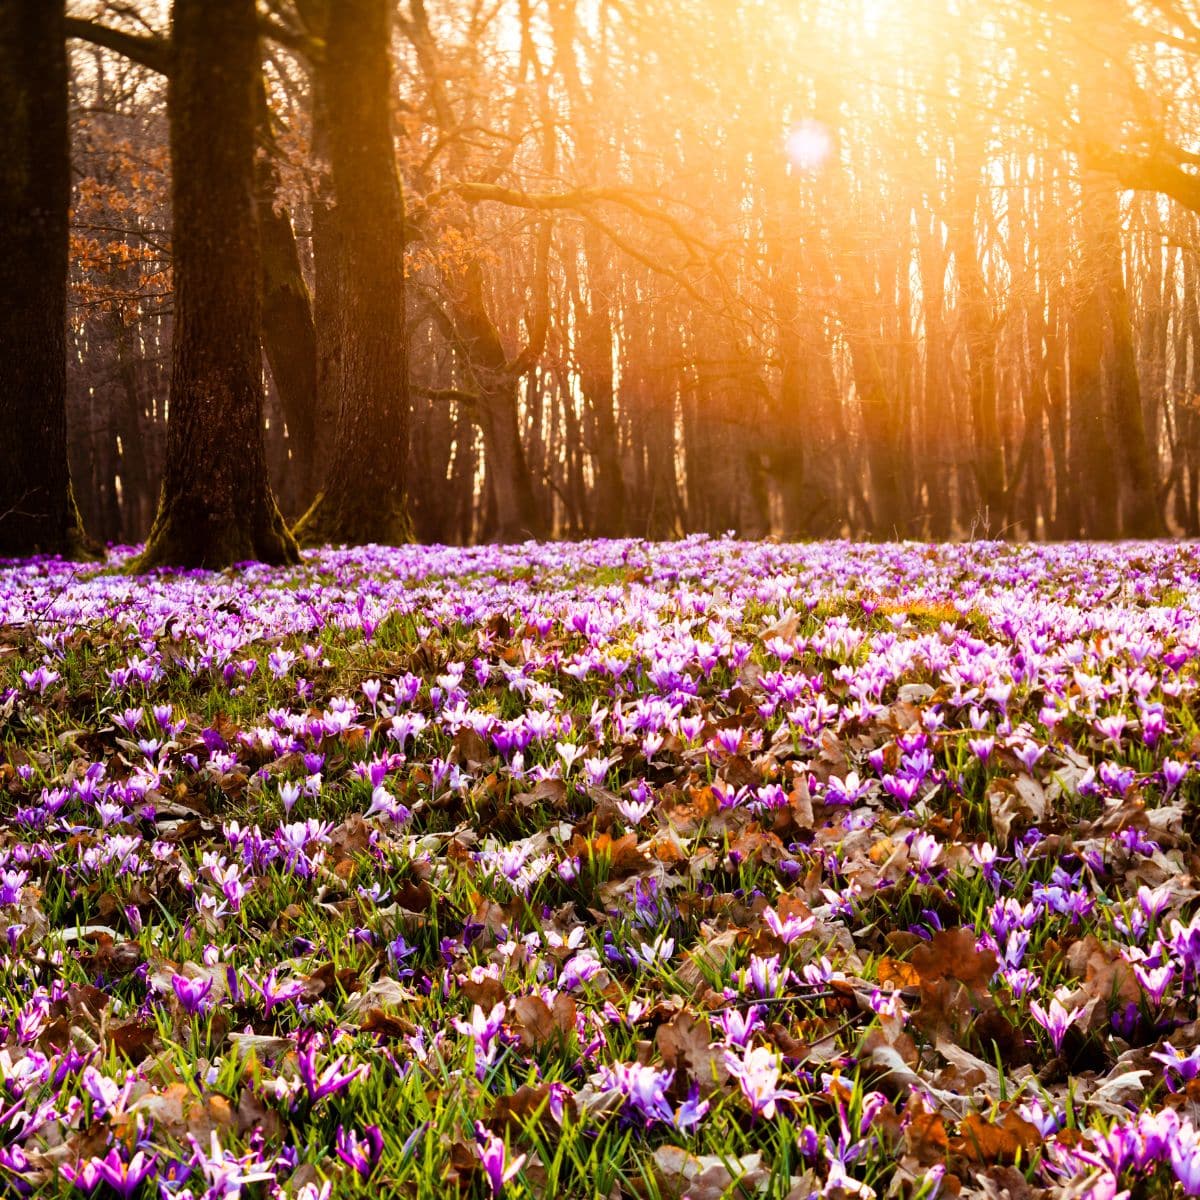 a field of crocus flowers from which saffron is derived.